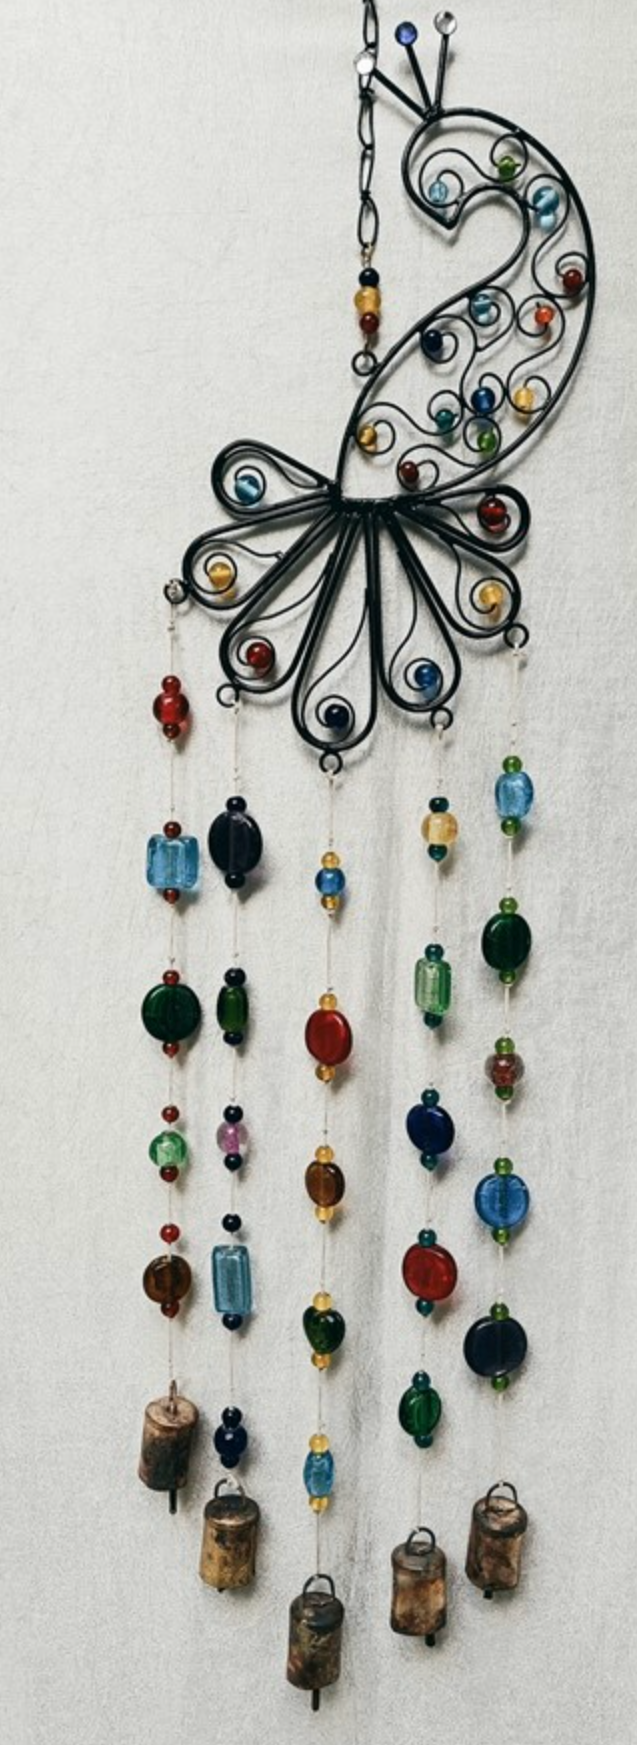 Iron Peacock Chime W/ Glass Beads & 5 Bells